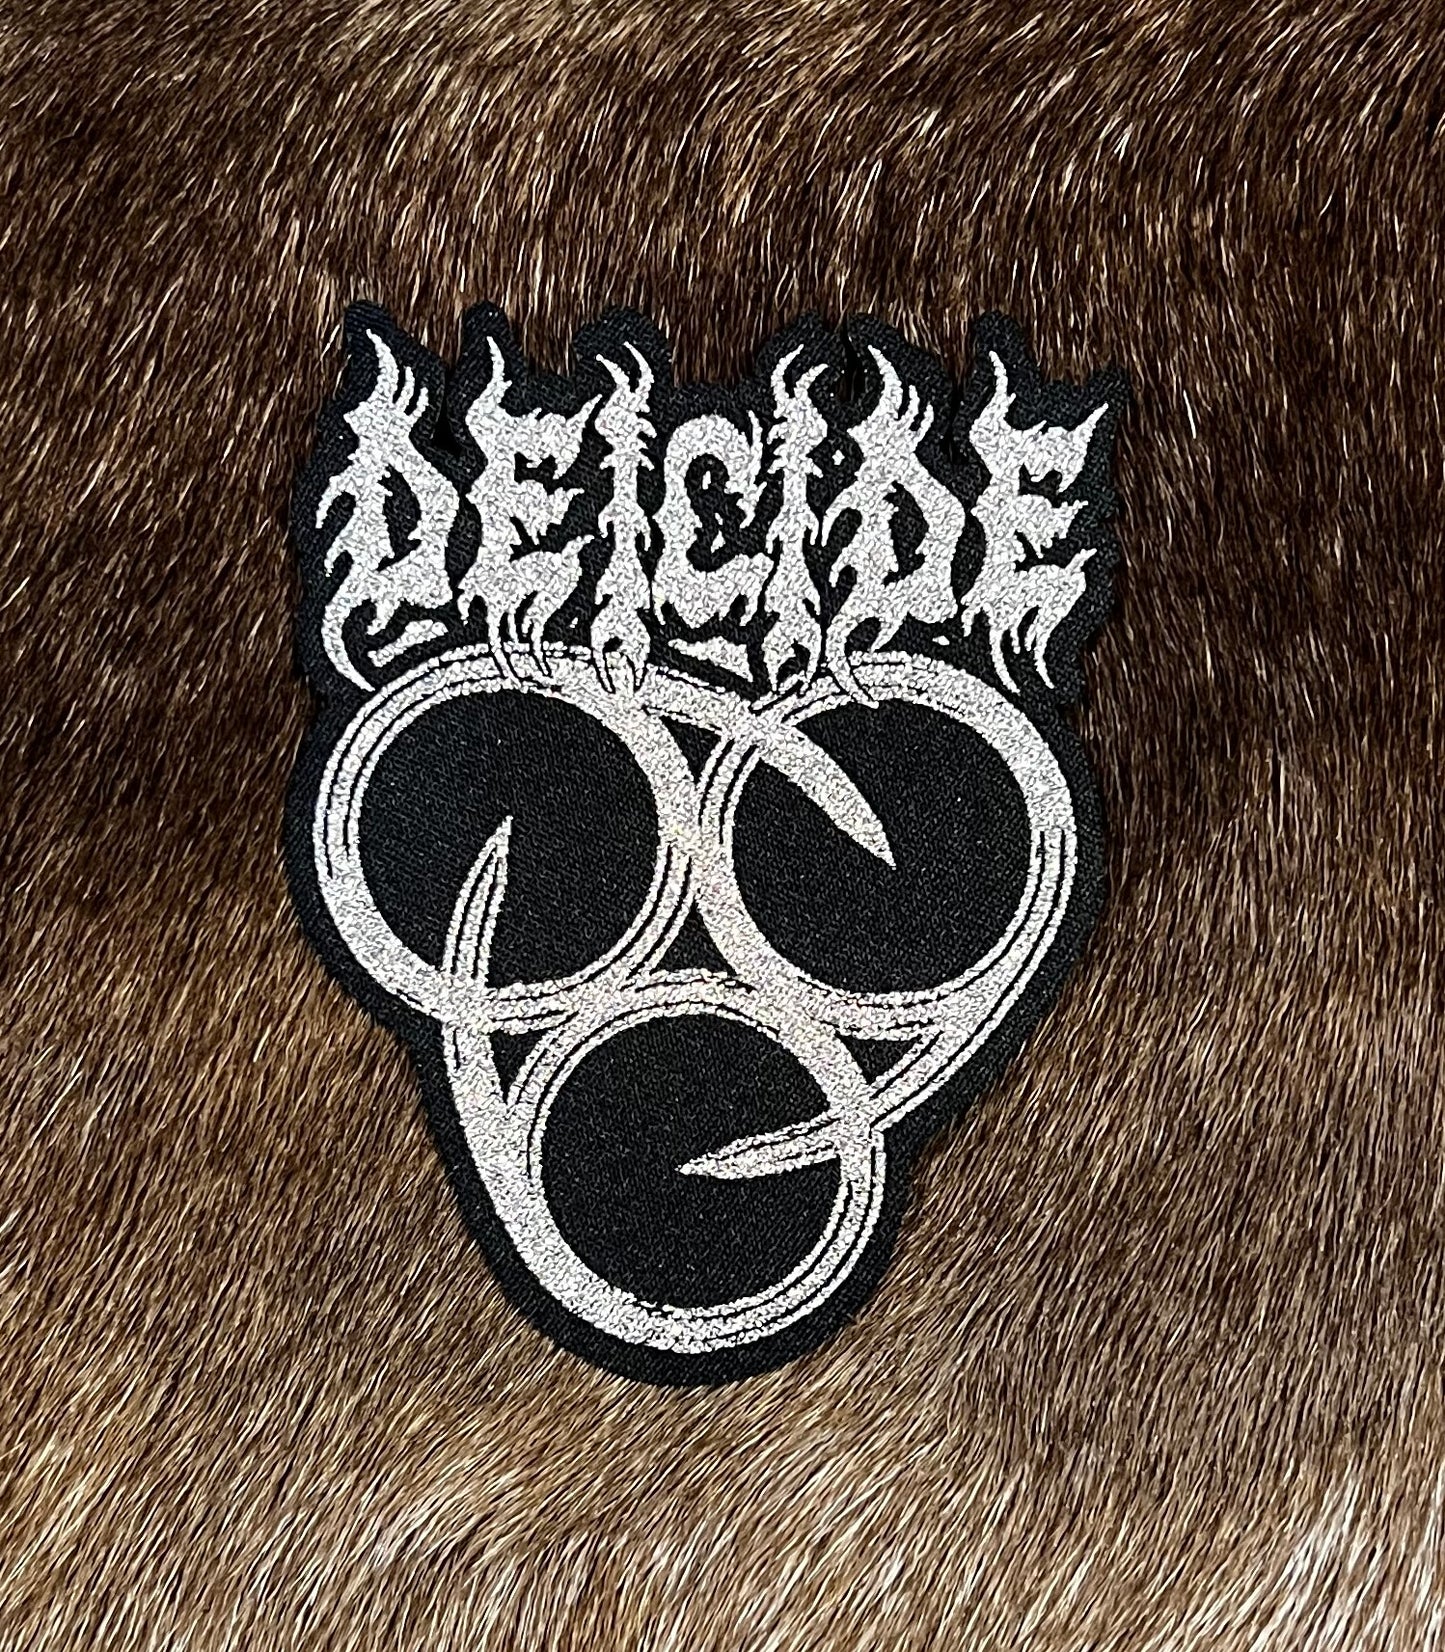 Deicide - Insineratehymn Cut Out Patch